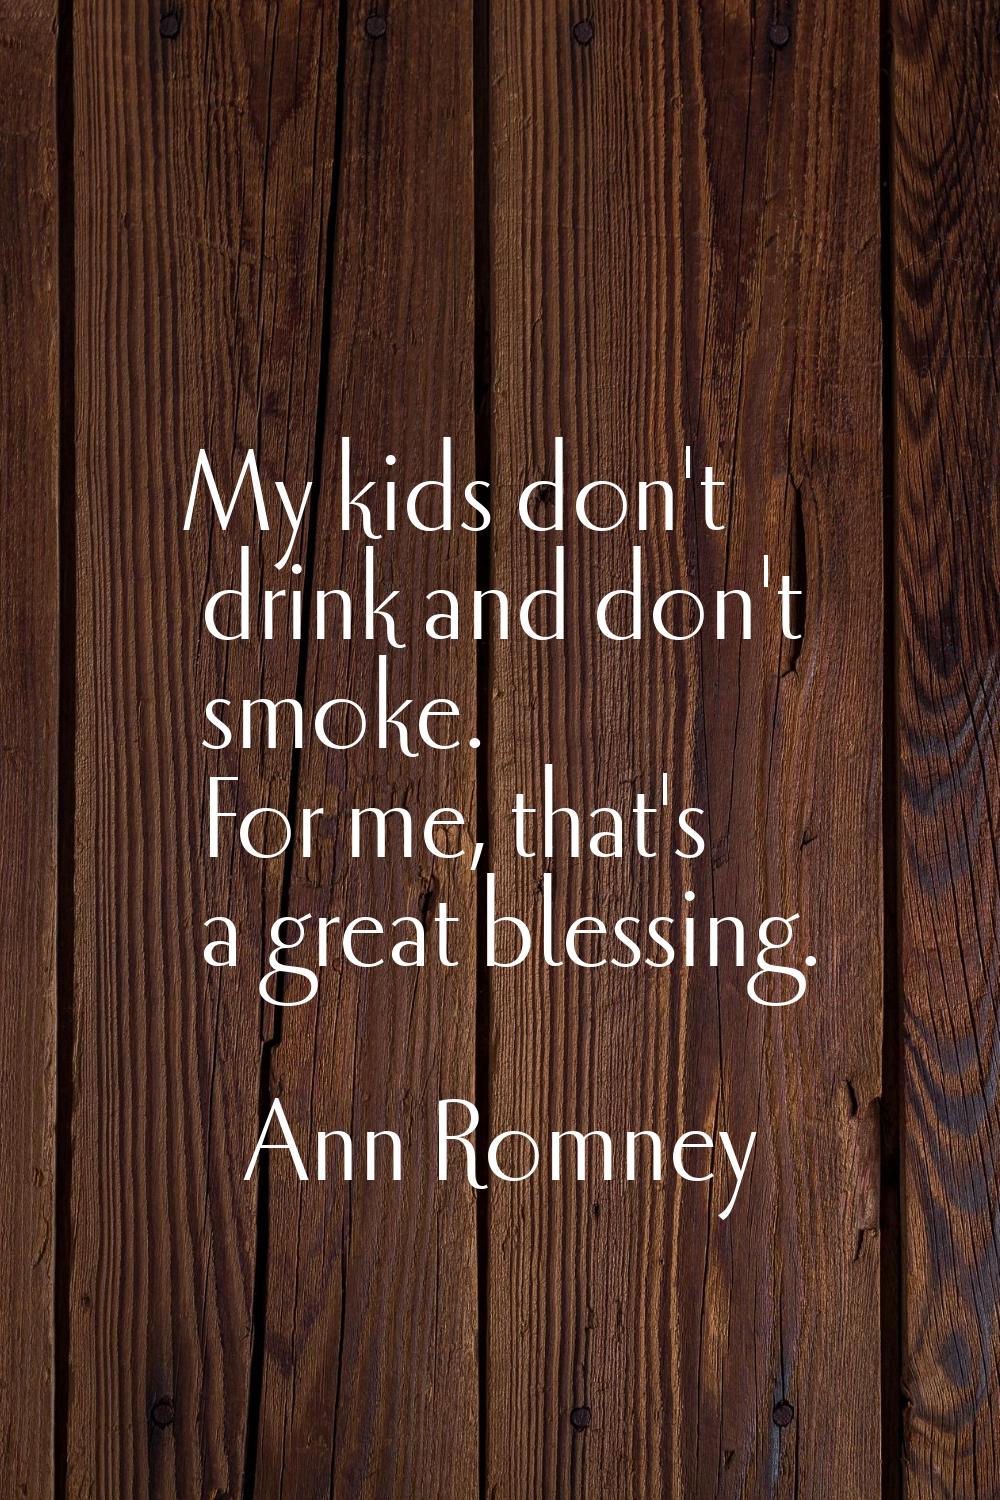 My kids don't drink and don't smoke. For me, that's a great blessing.